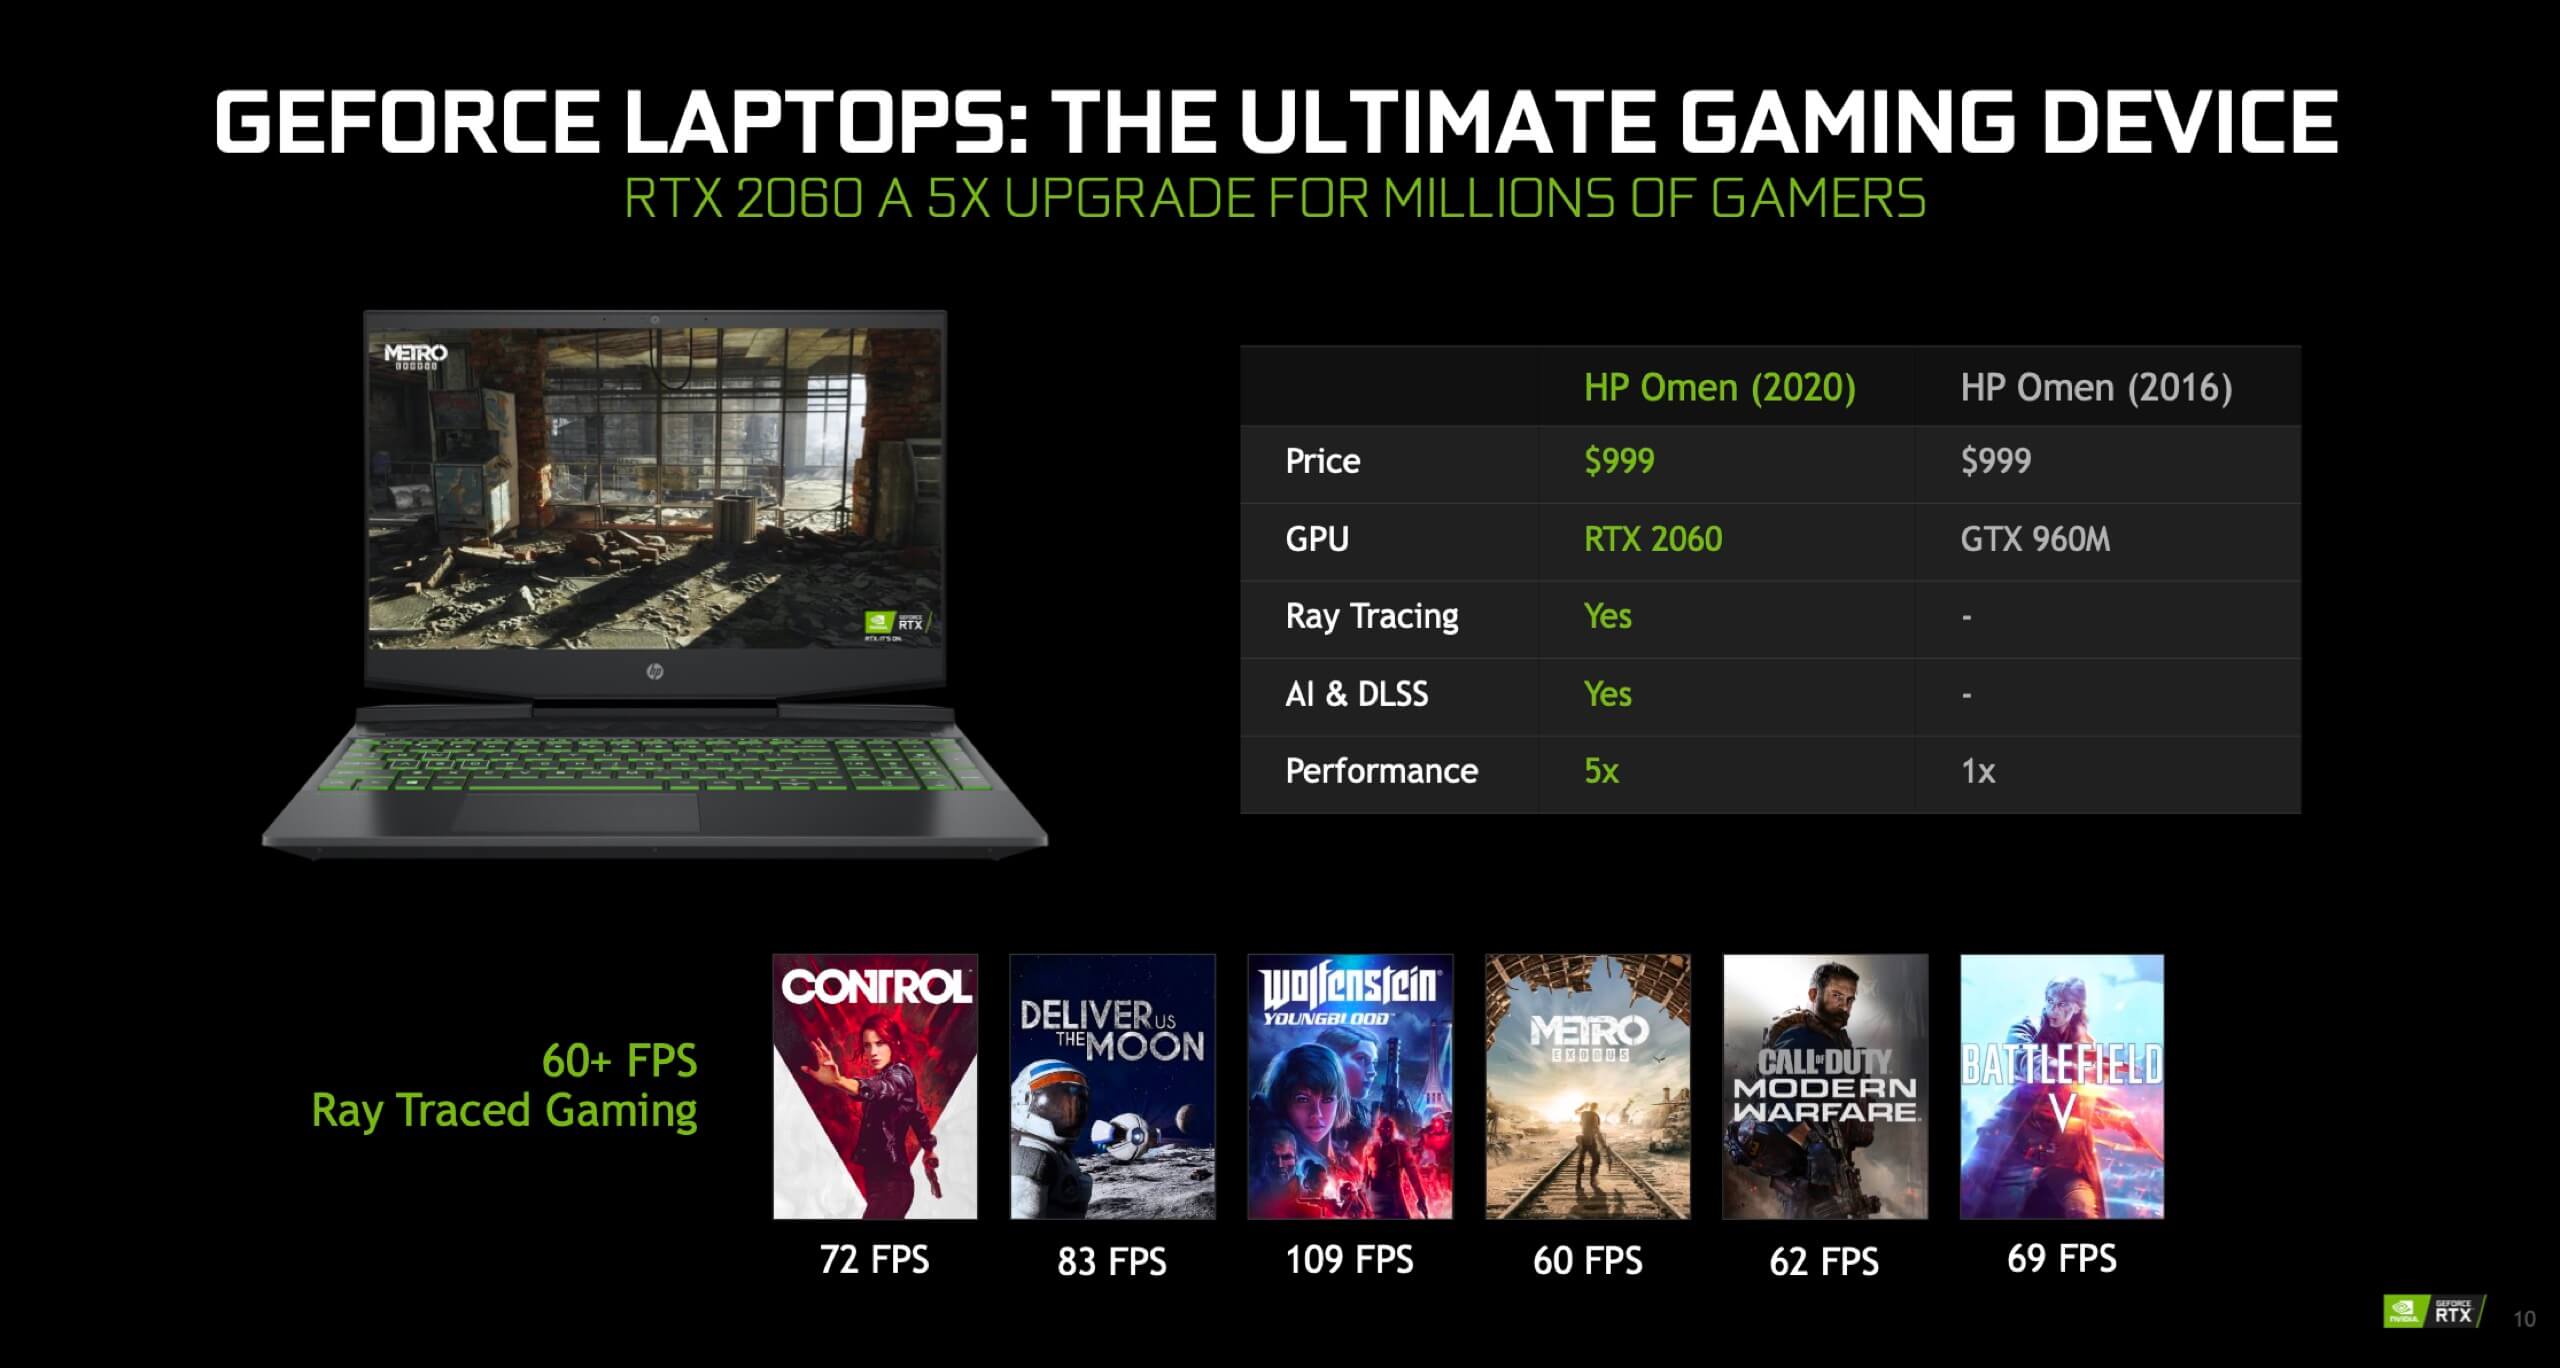 Nvidia goes Super with new GeForce RTX GPUs for gaming laptops 5